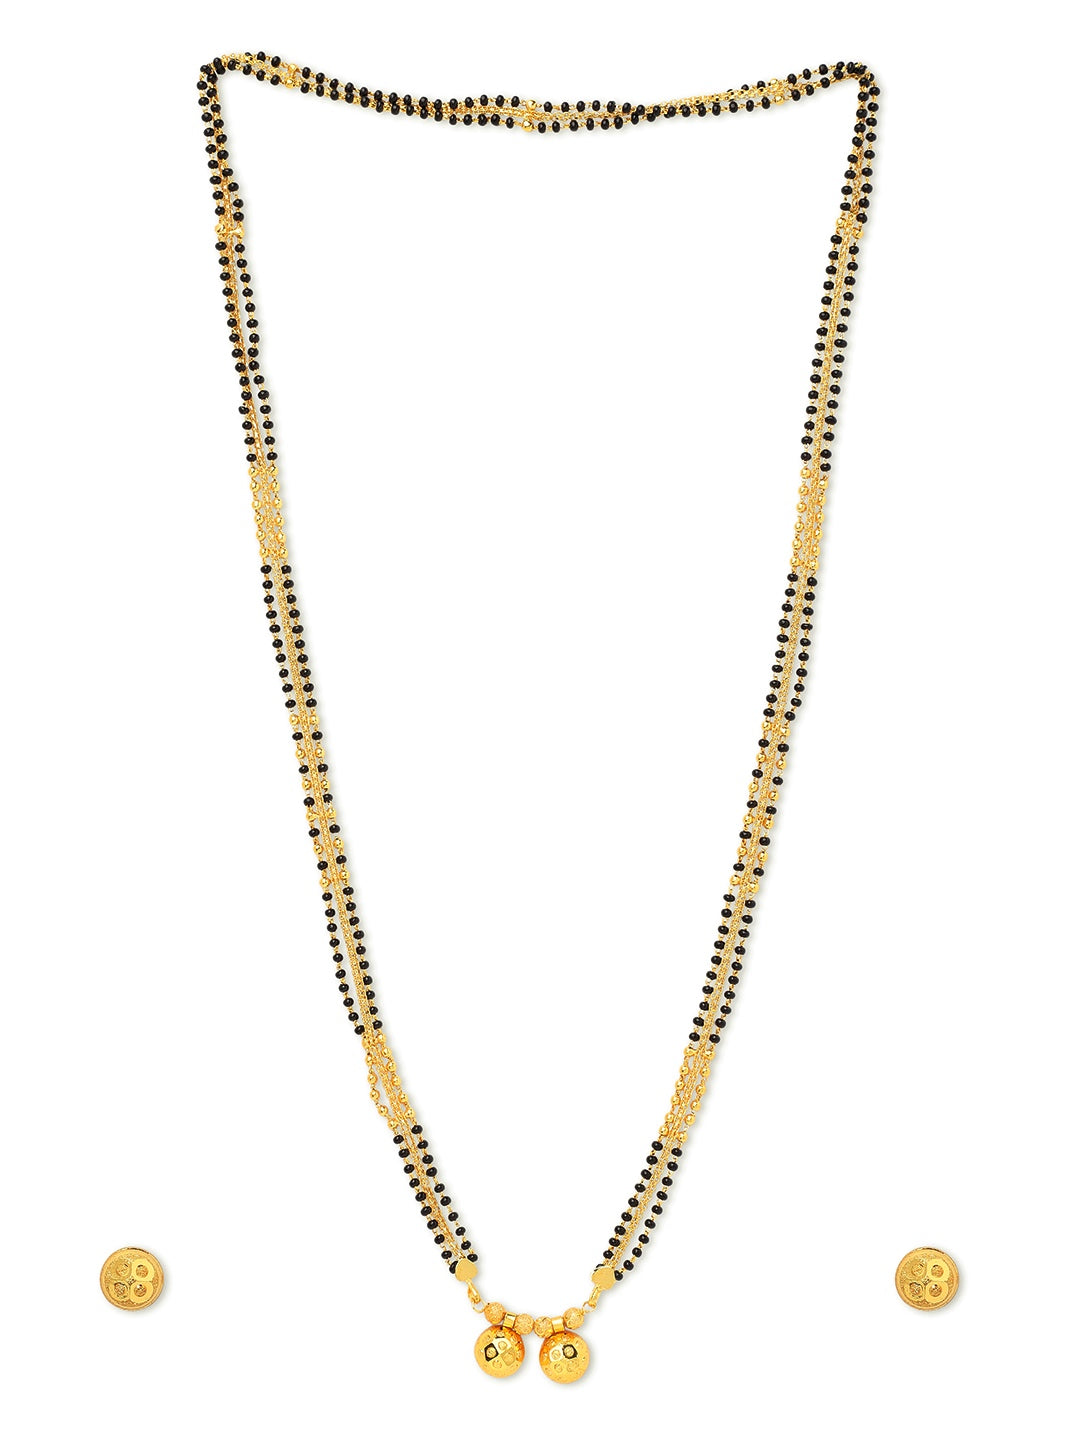 Mangalsutra designs with Earrings